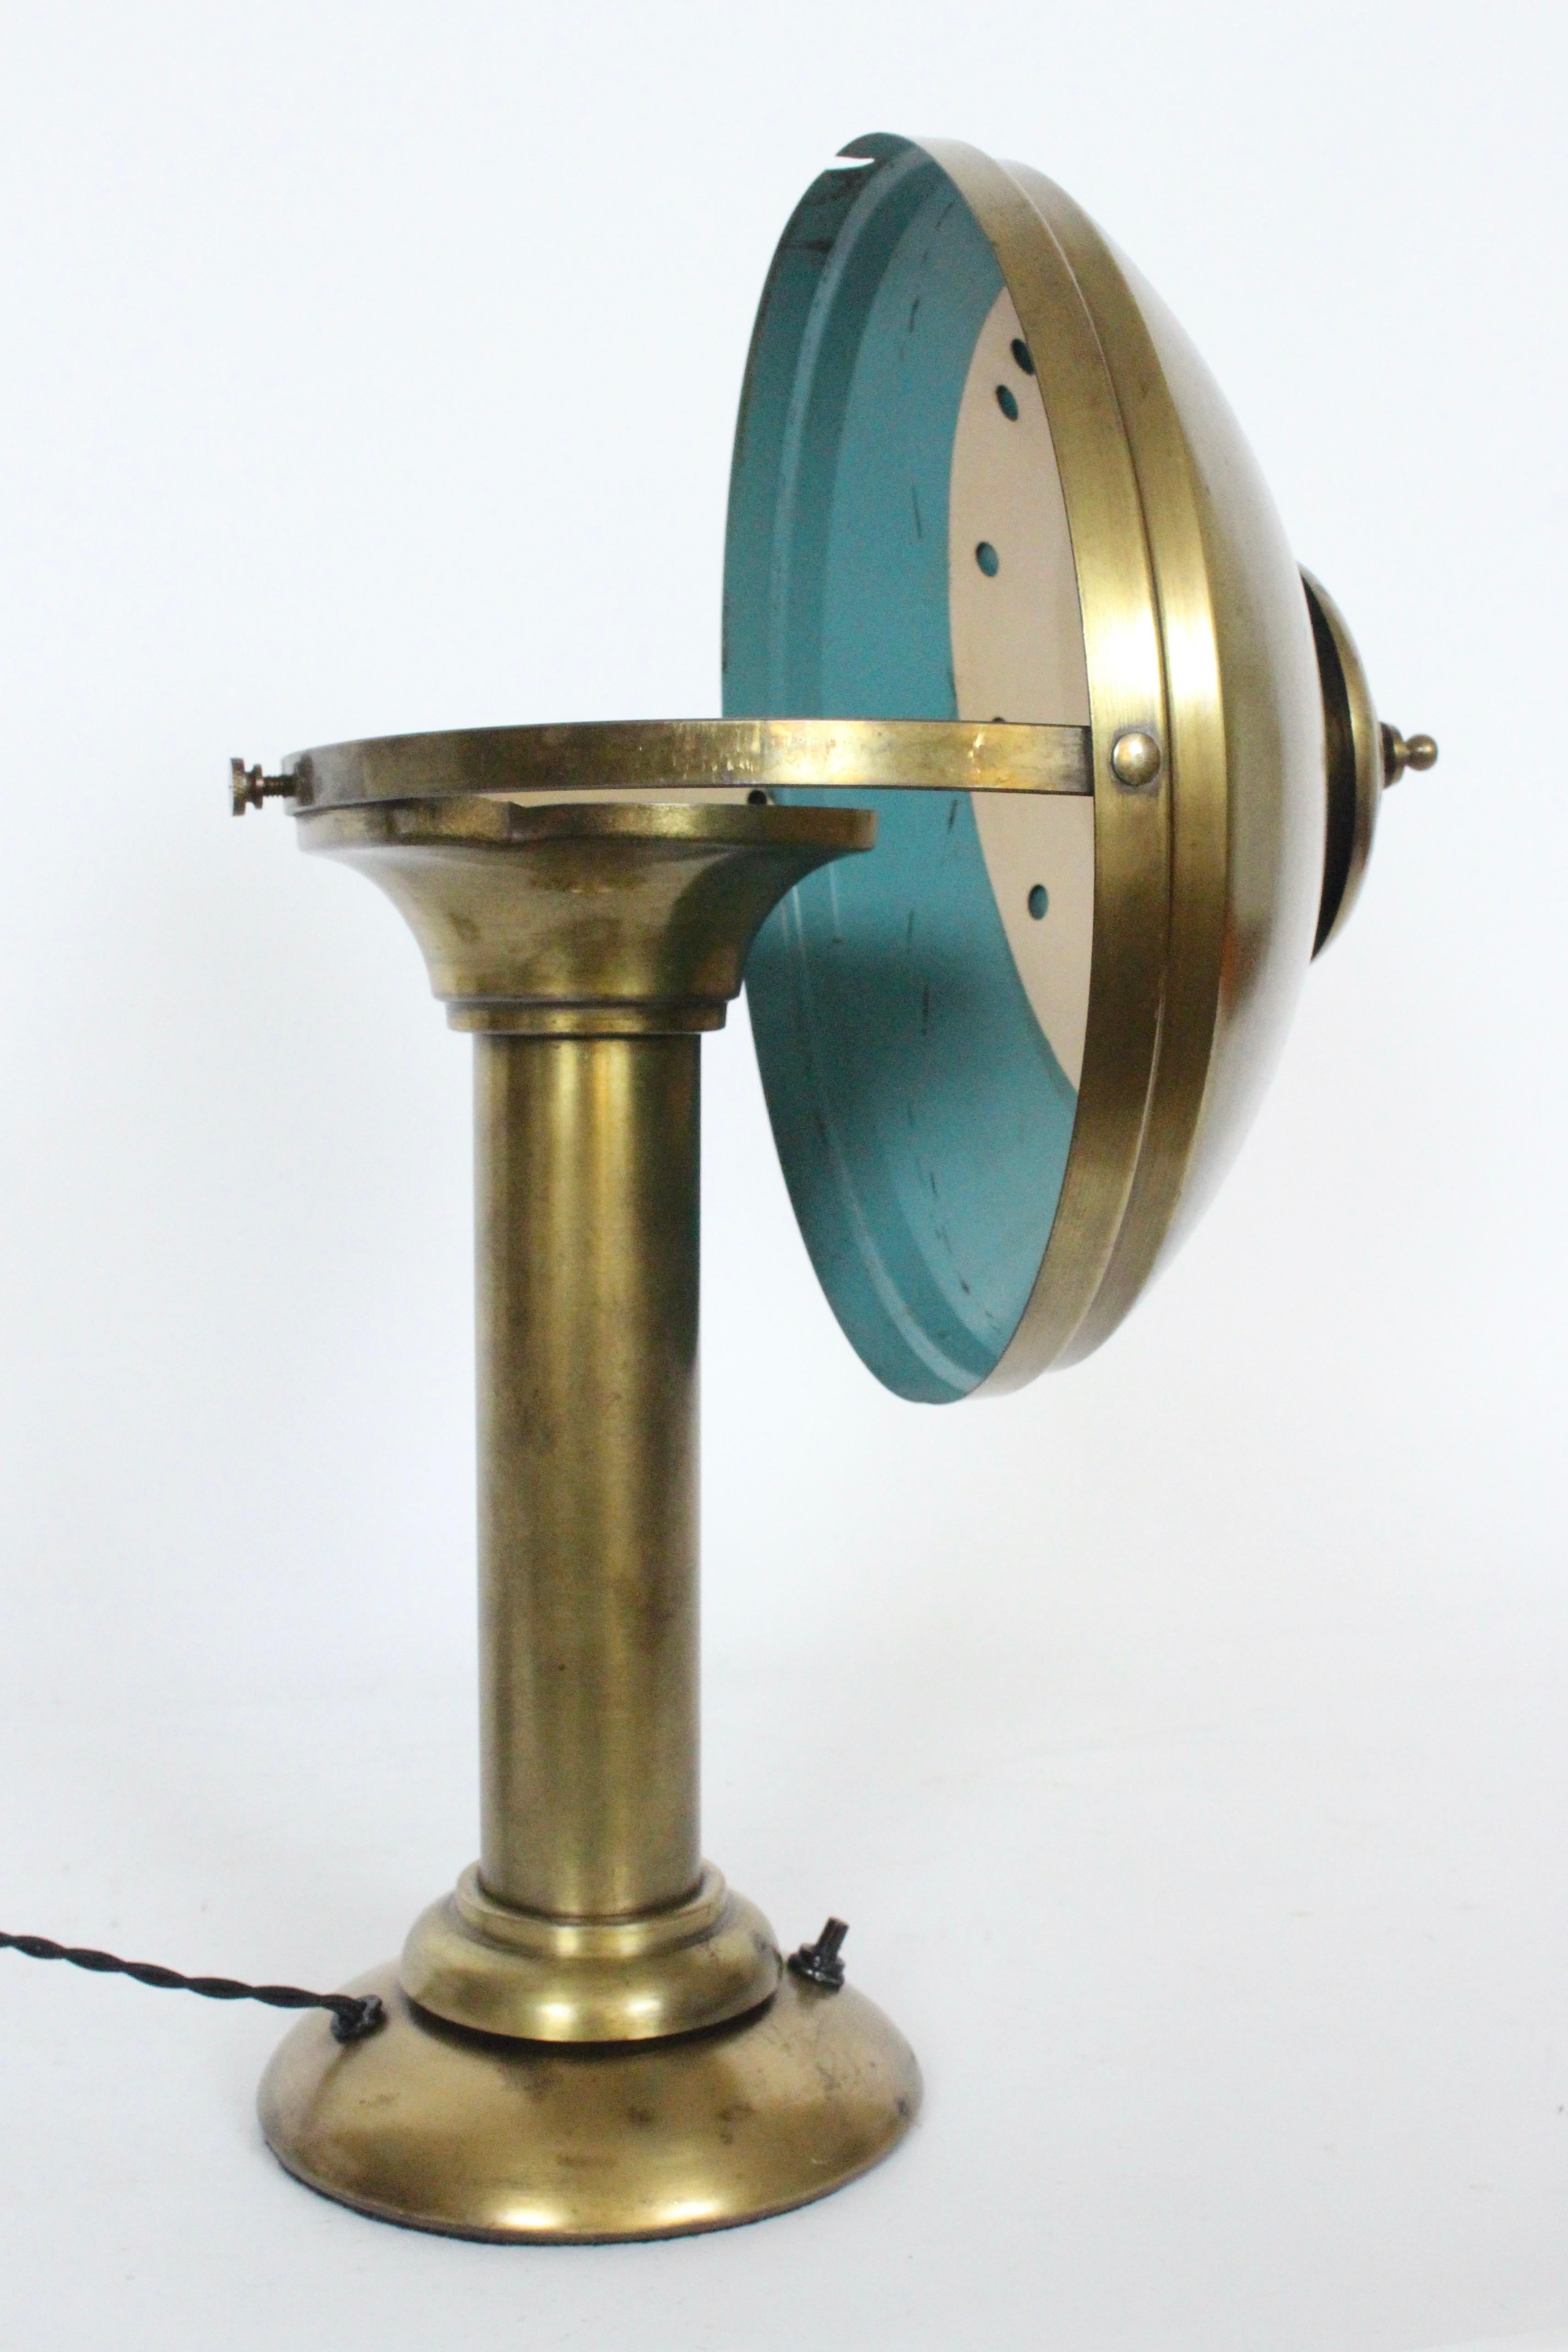 Fairies Mfg. Co. Cantilever All Brass Shaded Desk Lamp, 1920s For Sale 7